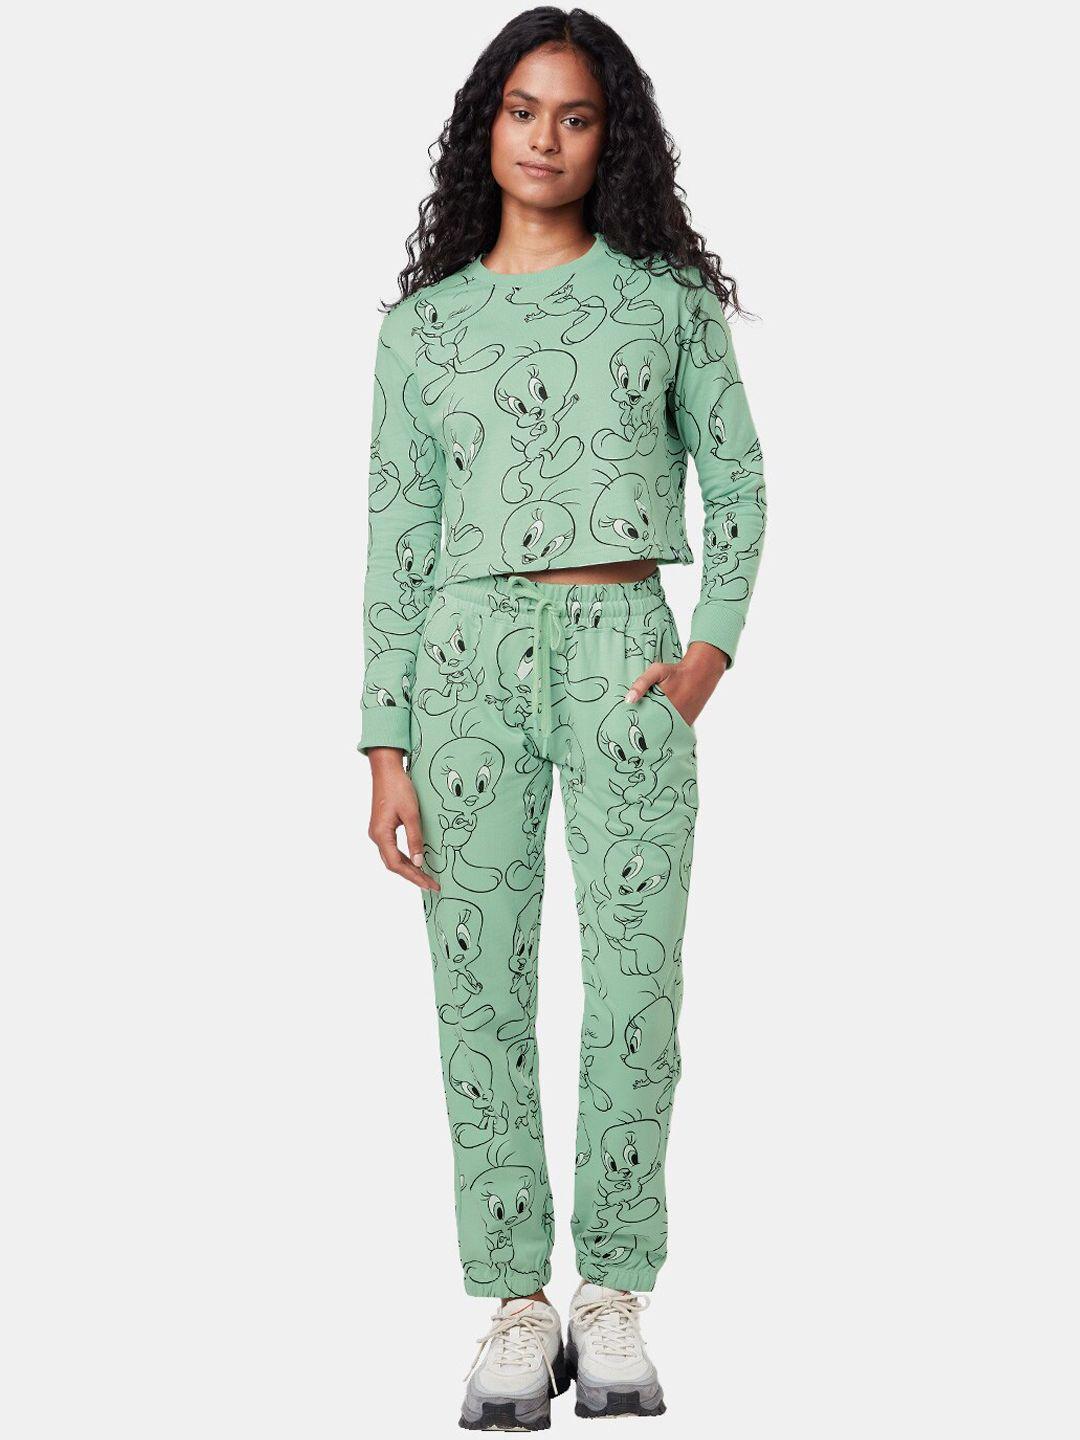 the souled store women tweety printed pure cotton co-ords